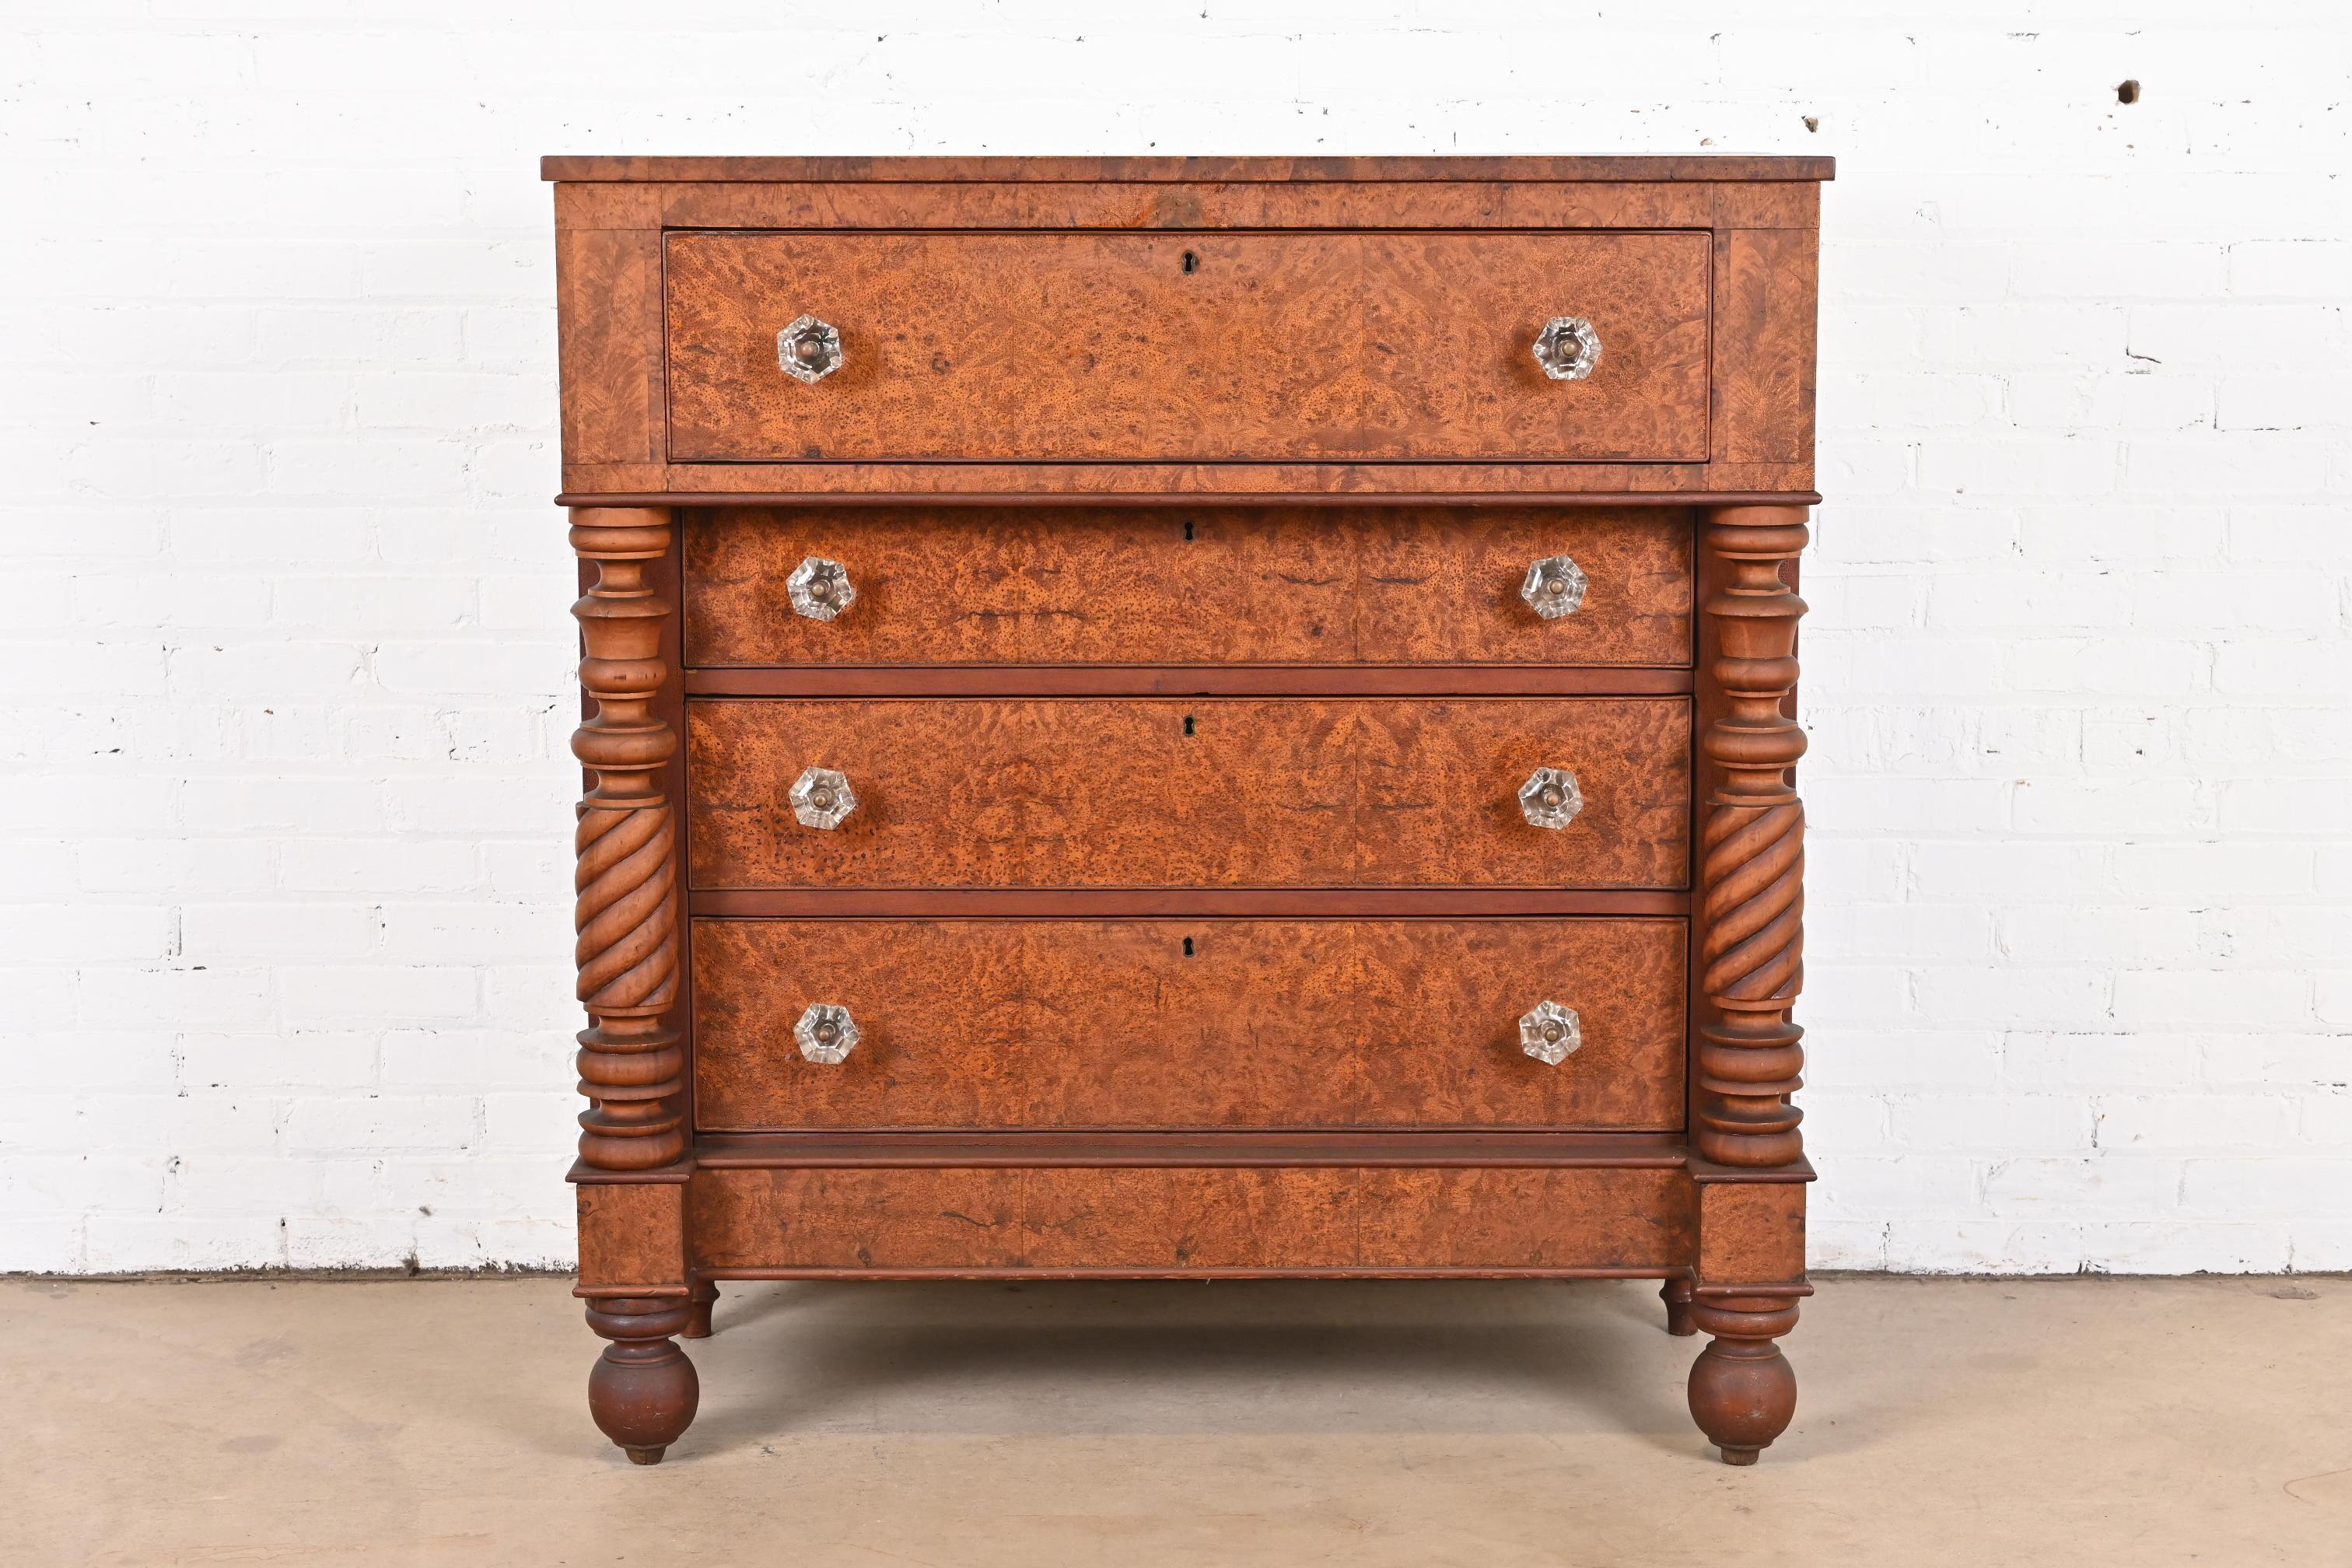 Antique American Empire Burled Mahogany Chest of Drawers, Circa 1820s In Good Condition For Sale In South Bend, IN